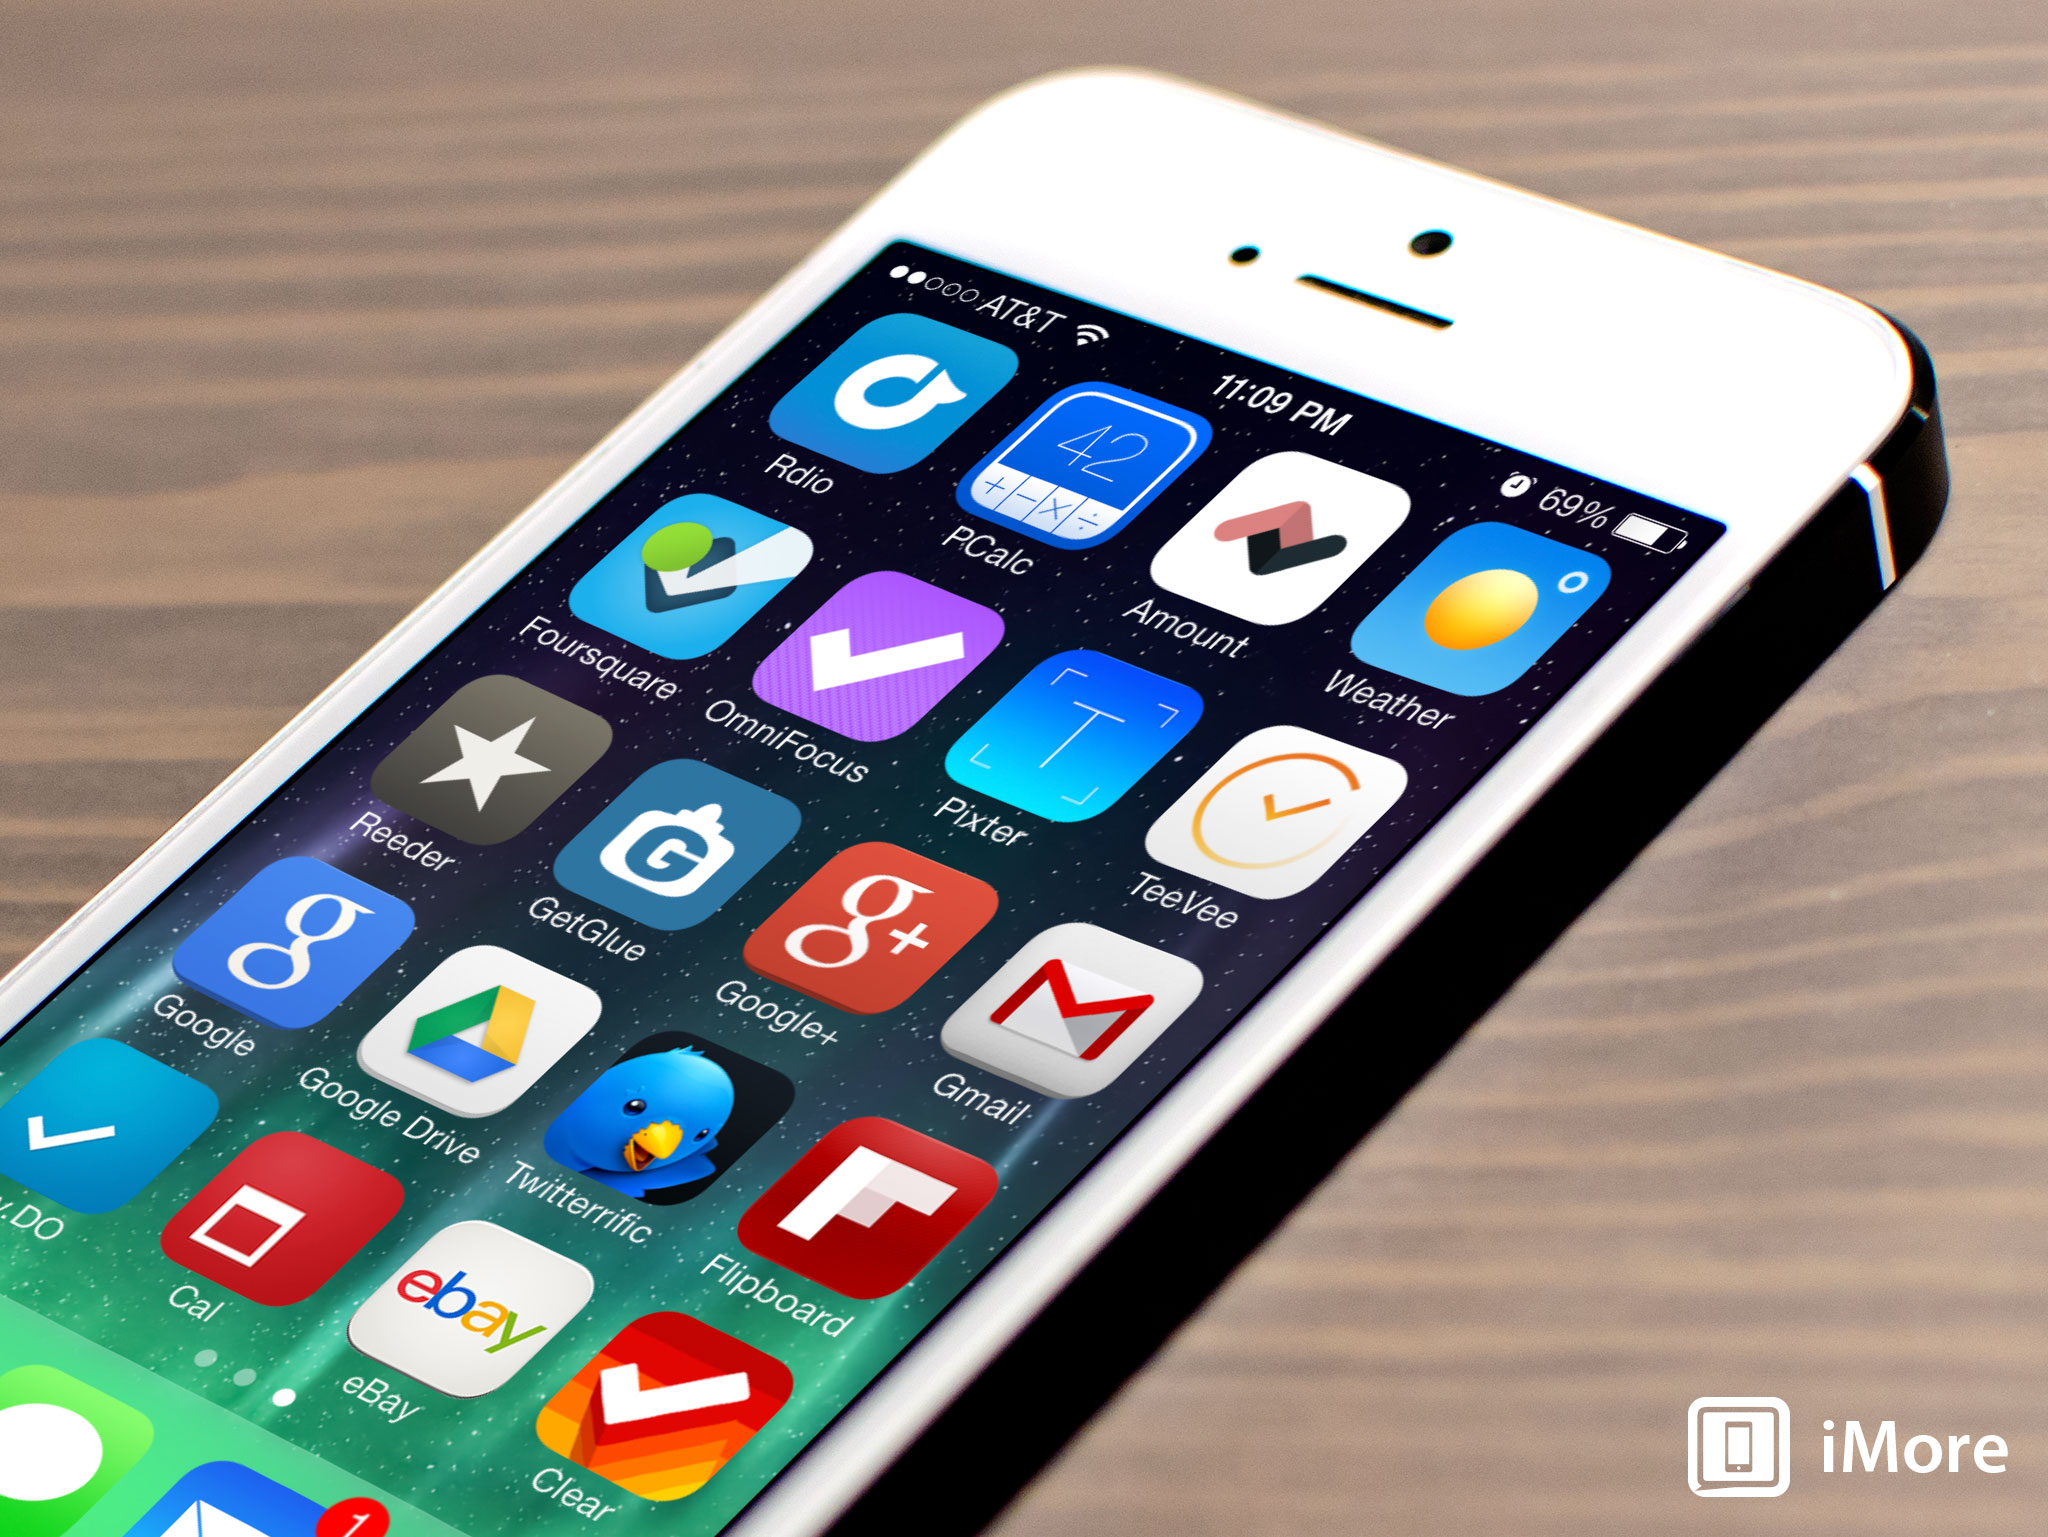 Best iOS 7 apps for iPhone | iMore